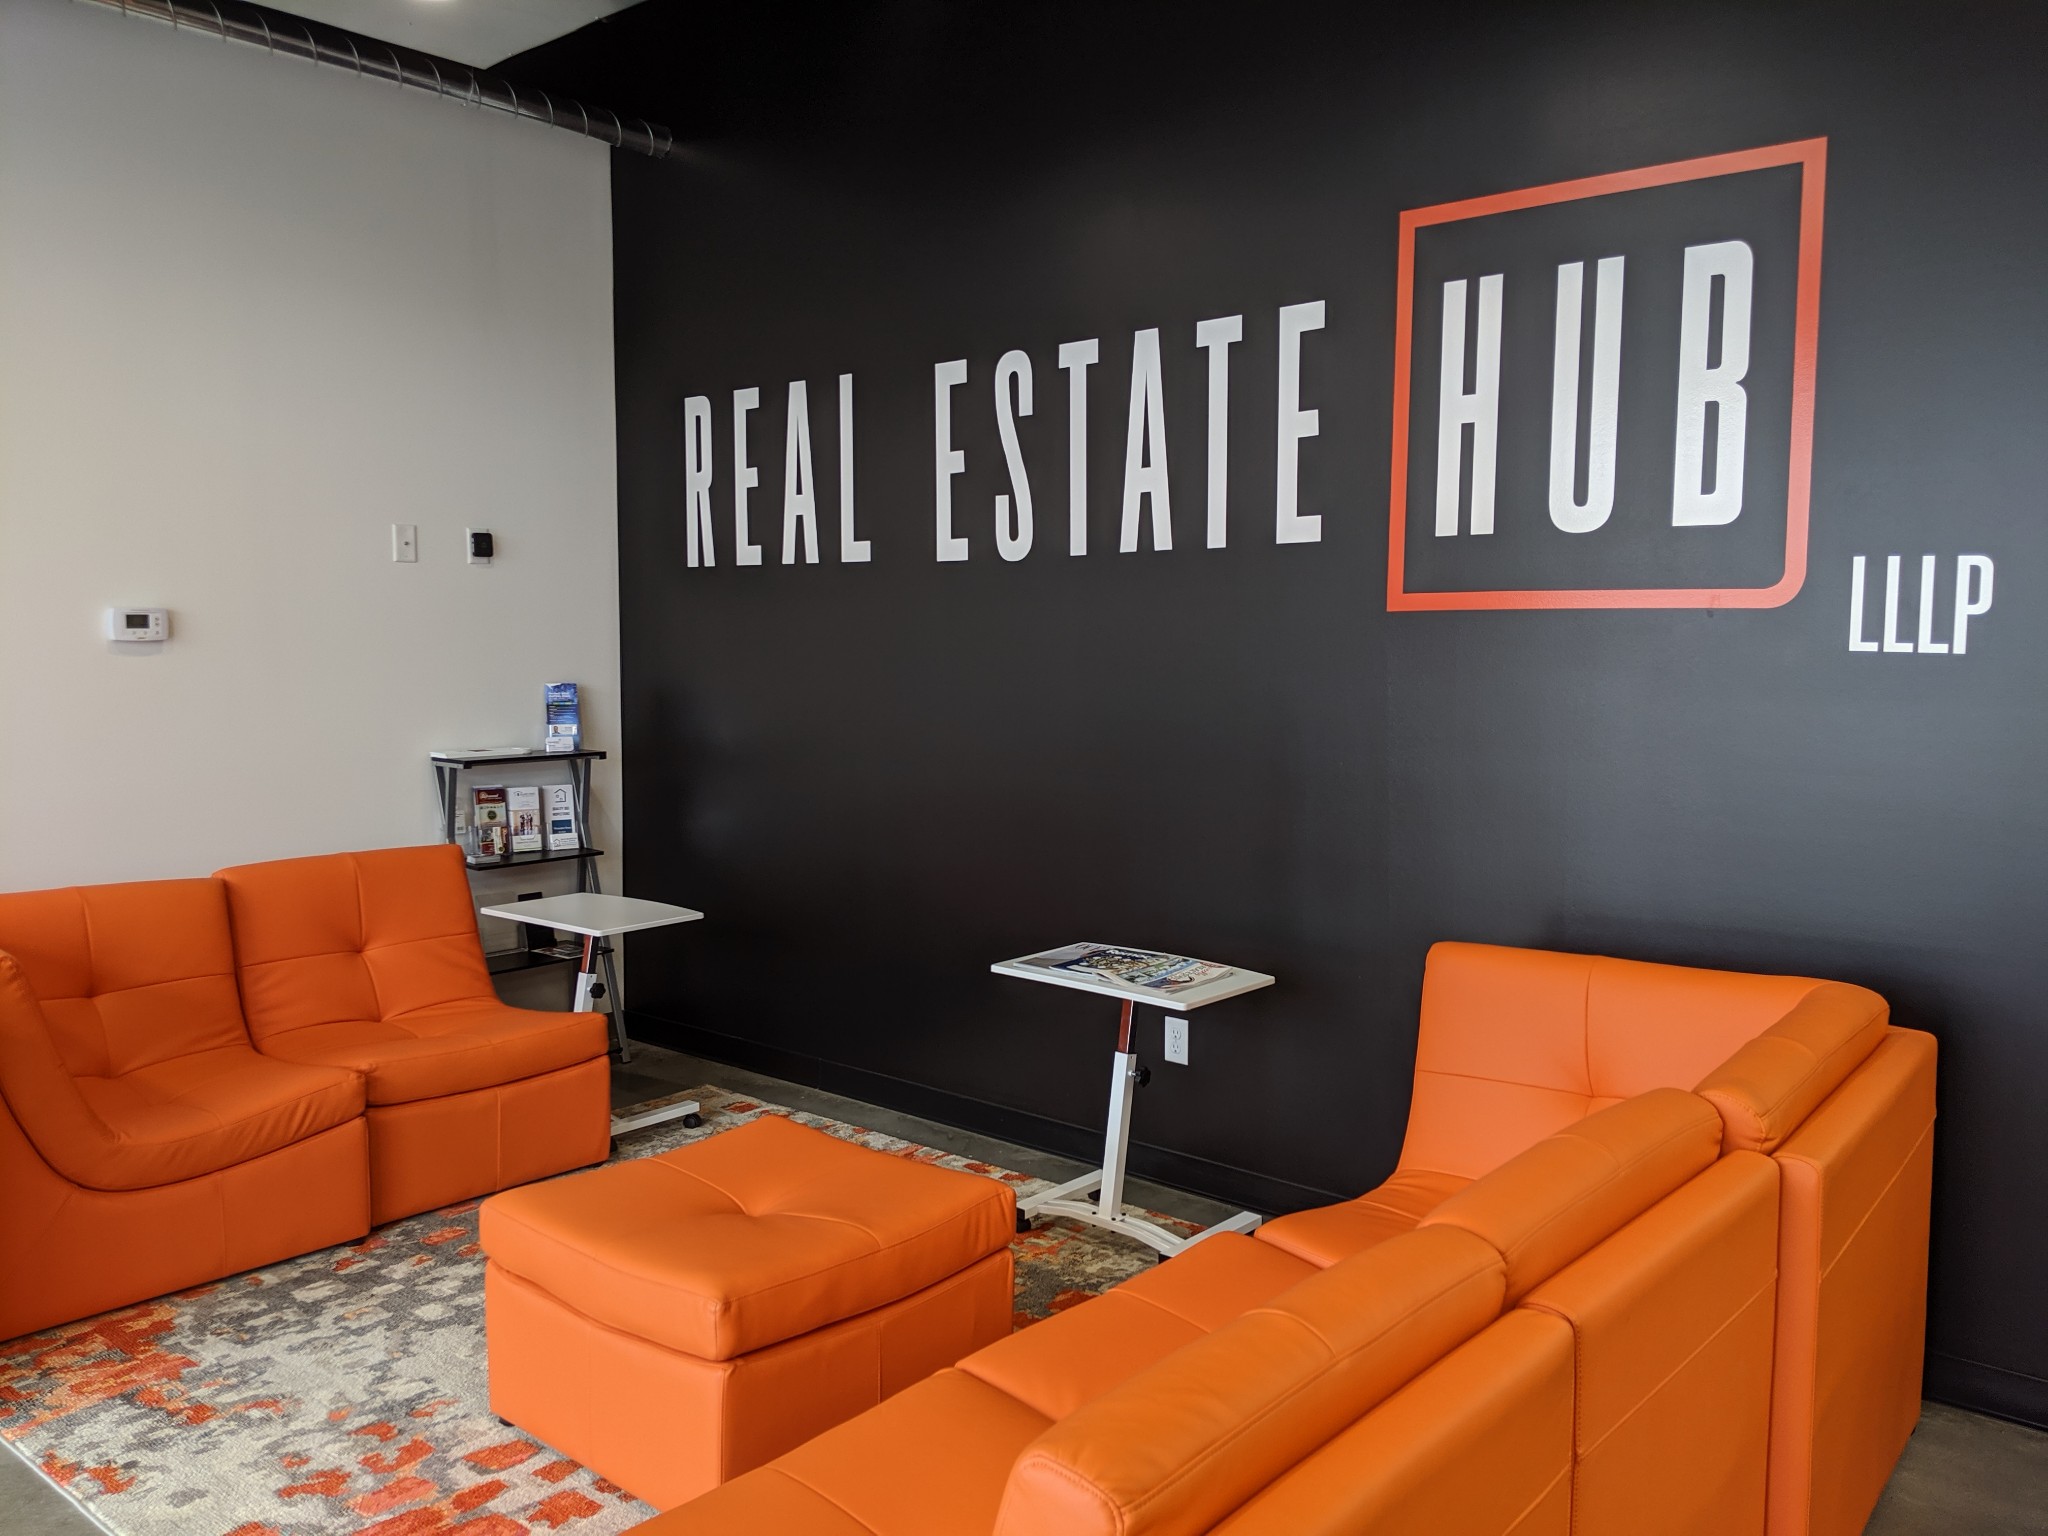 Join the Real Estate Hub Team. Contact Dana.